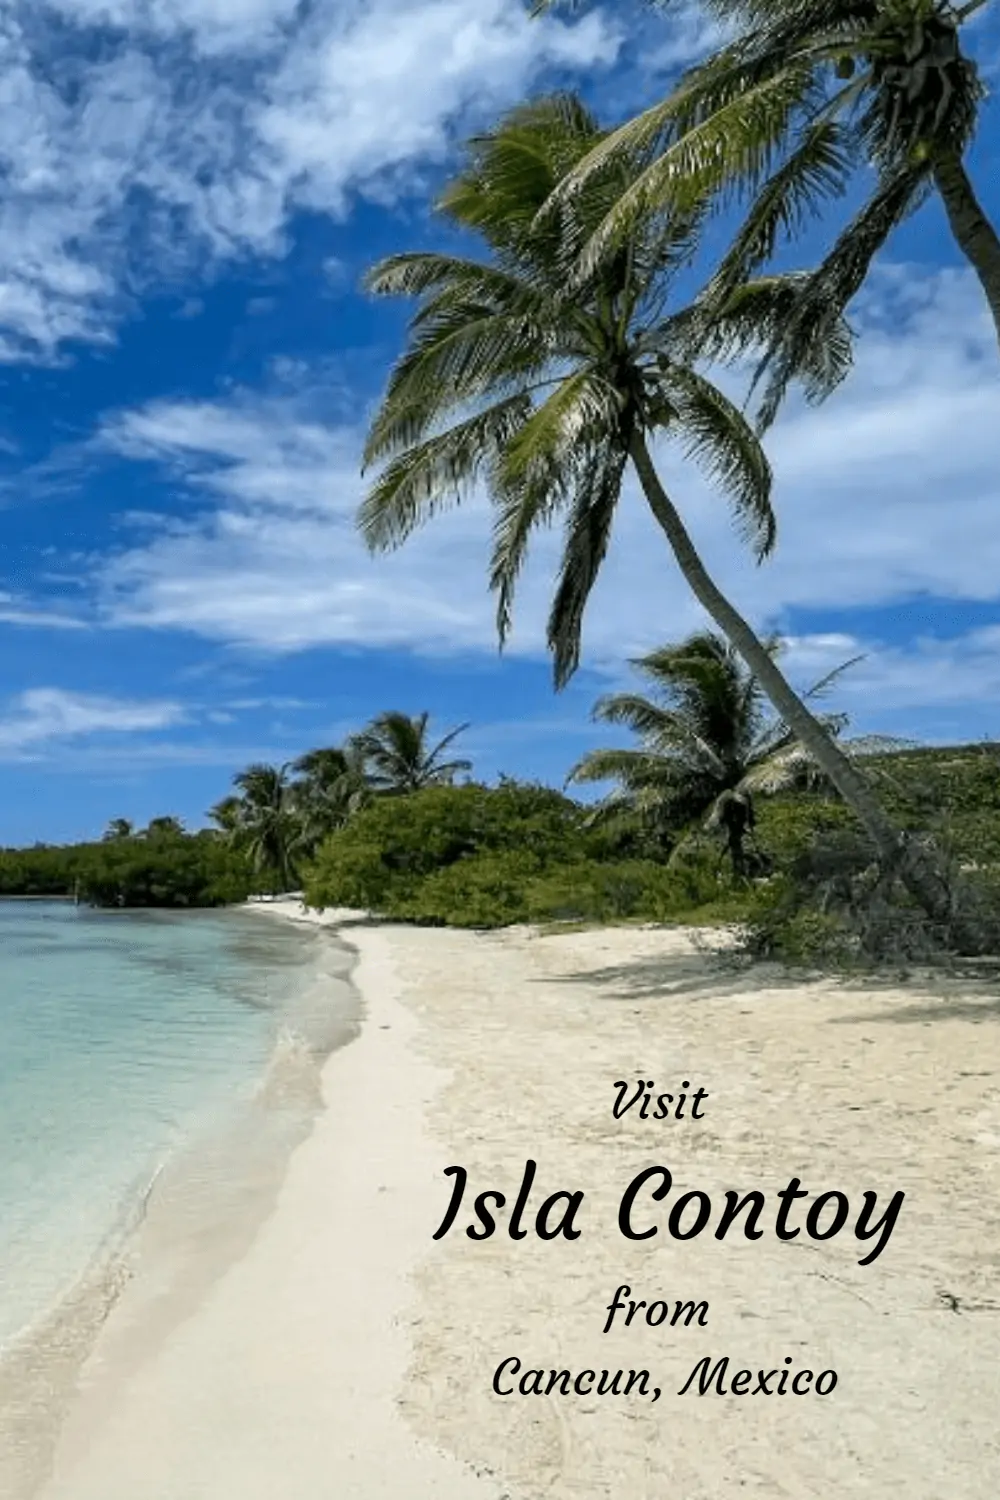 Take a day trip to Isla Contoy just 50 miles from Cancun, Mexico.